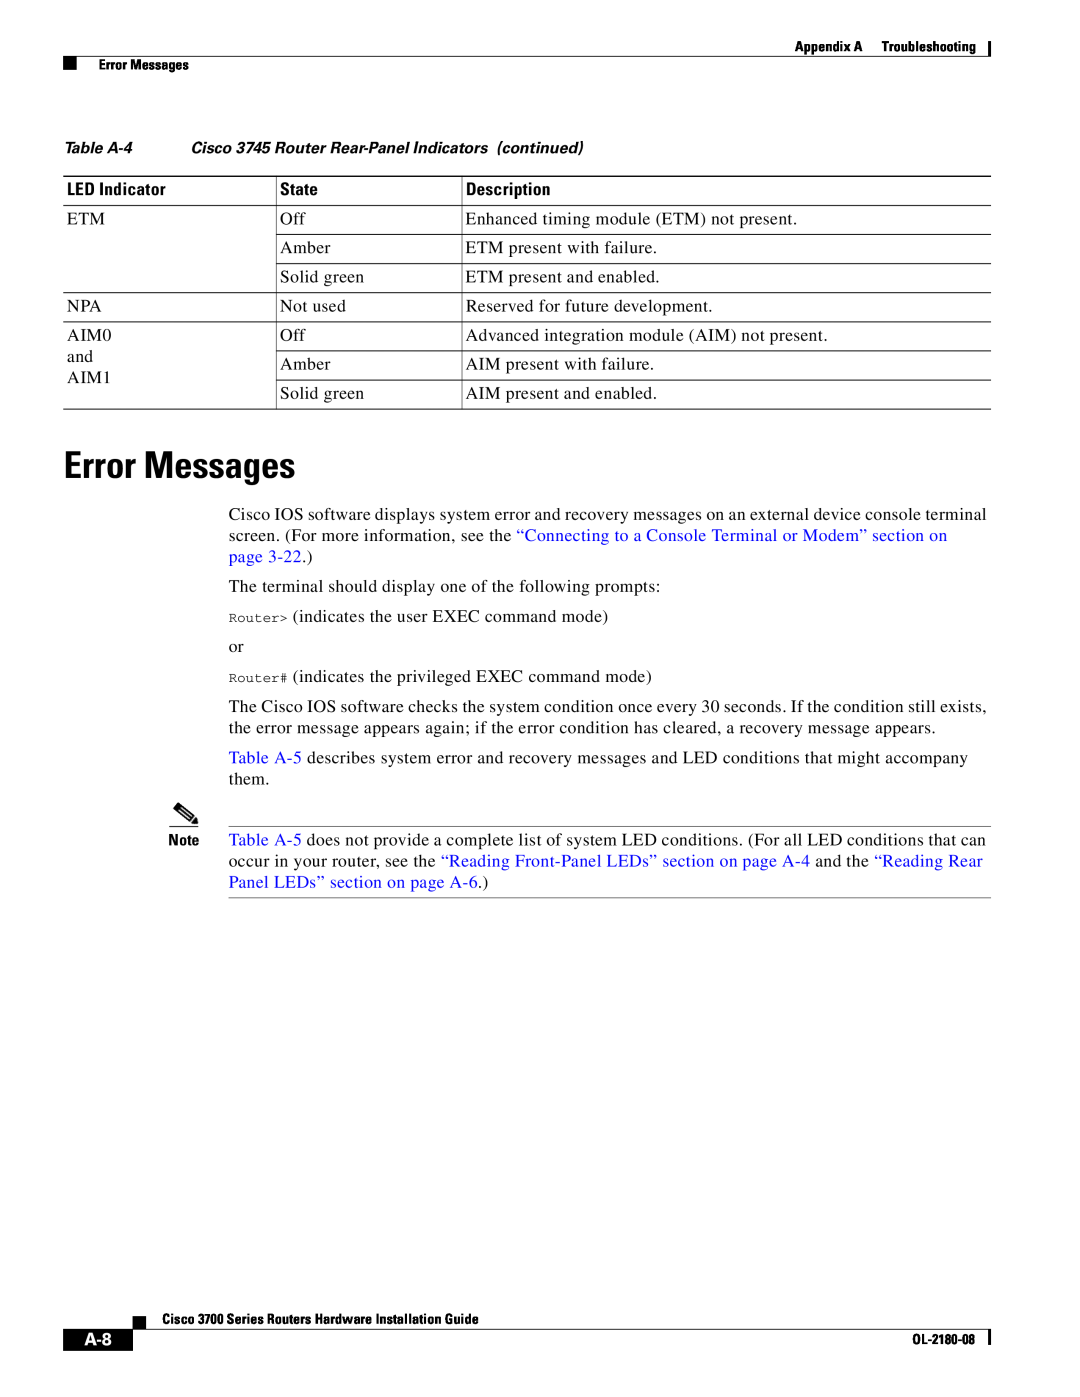 Cisco Systems 3700 Series manual Error Messages 